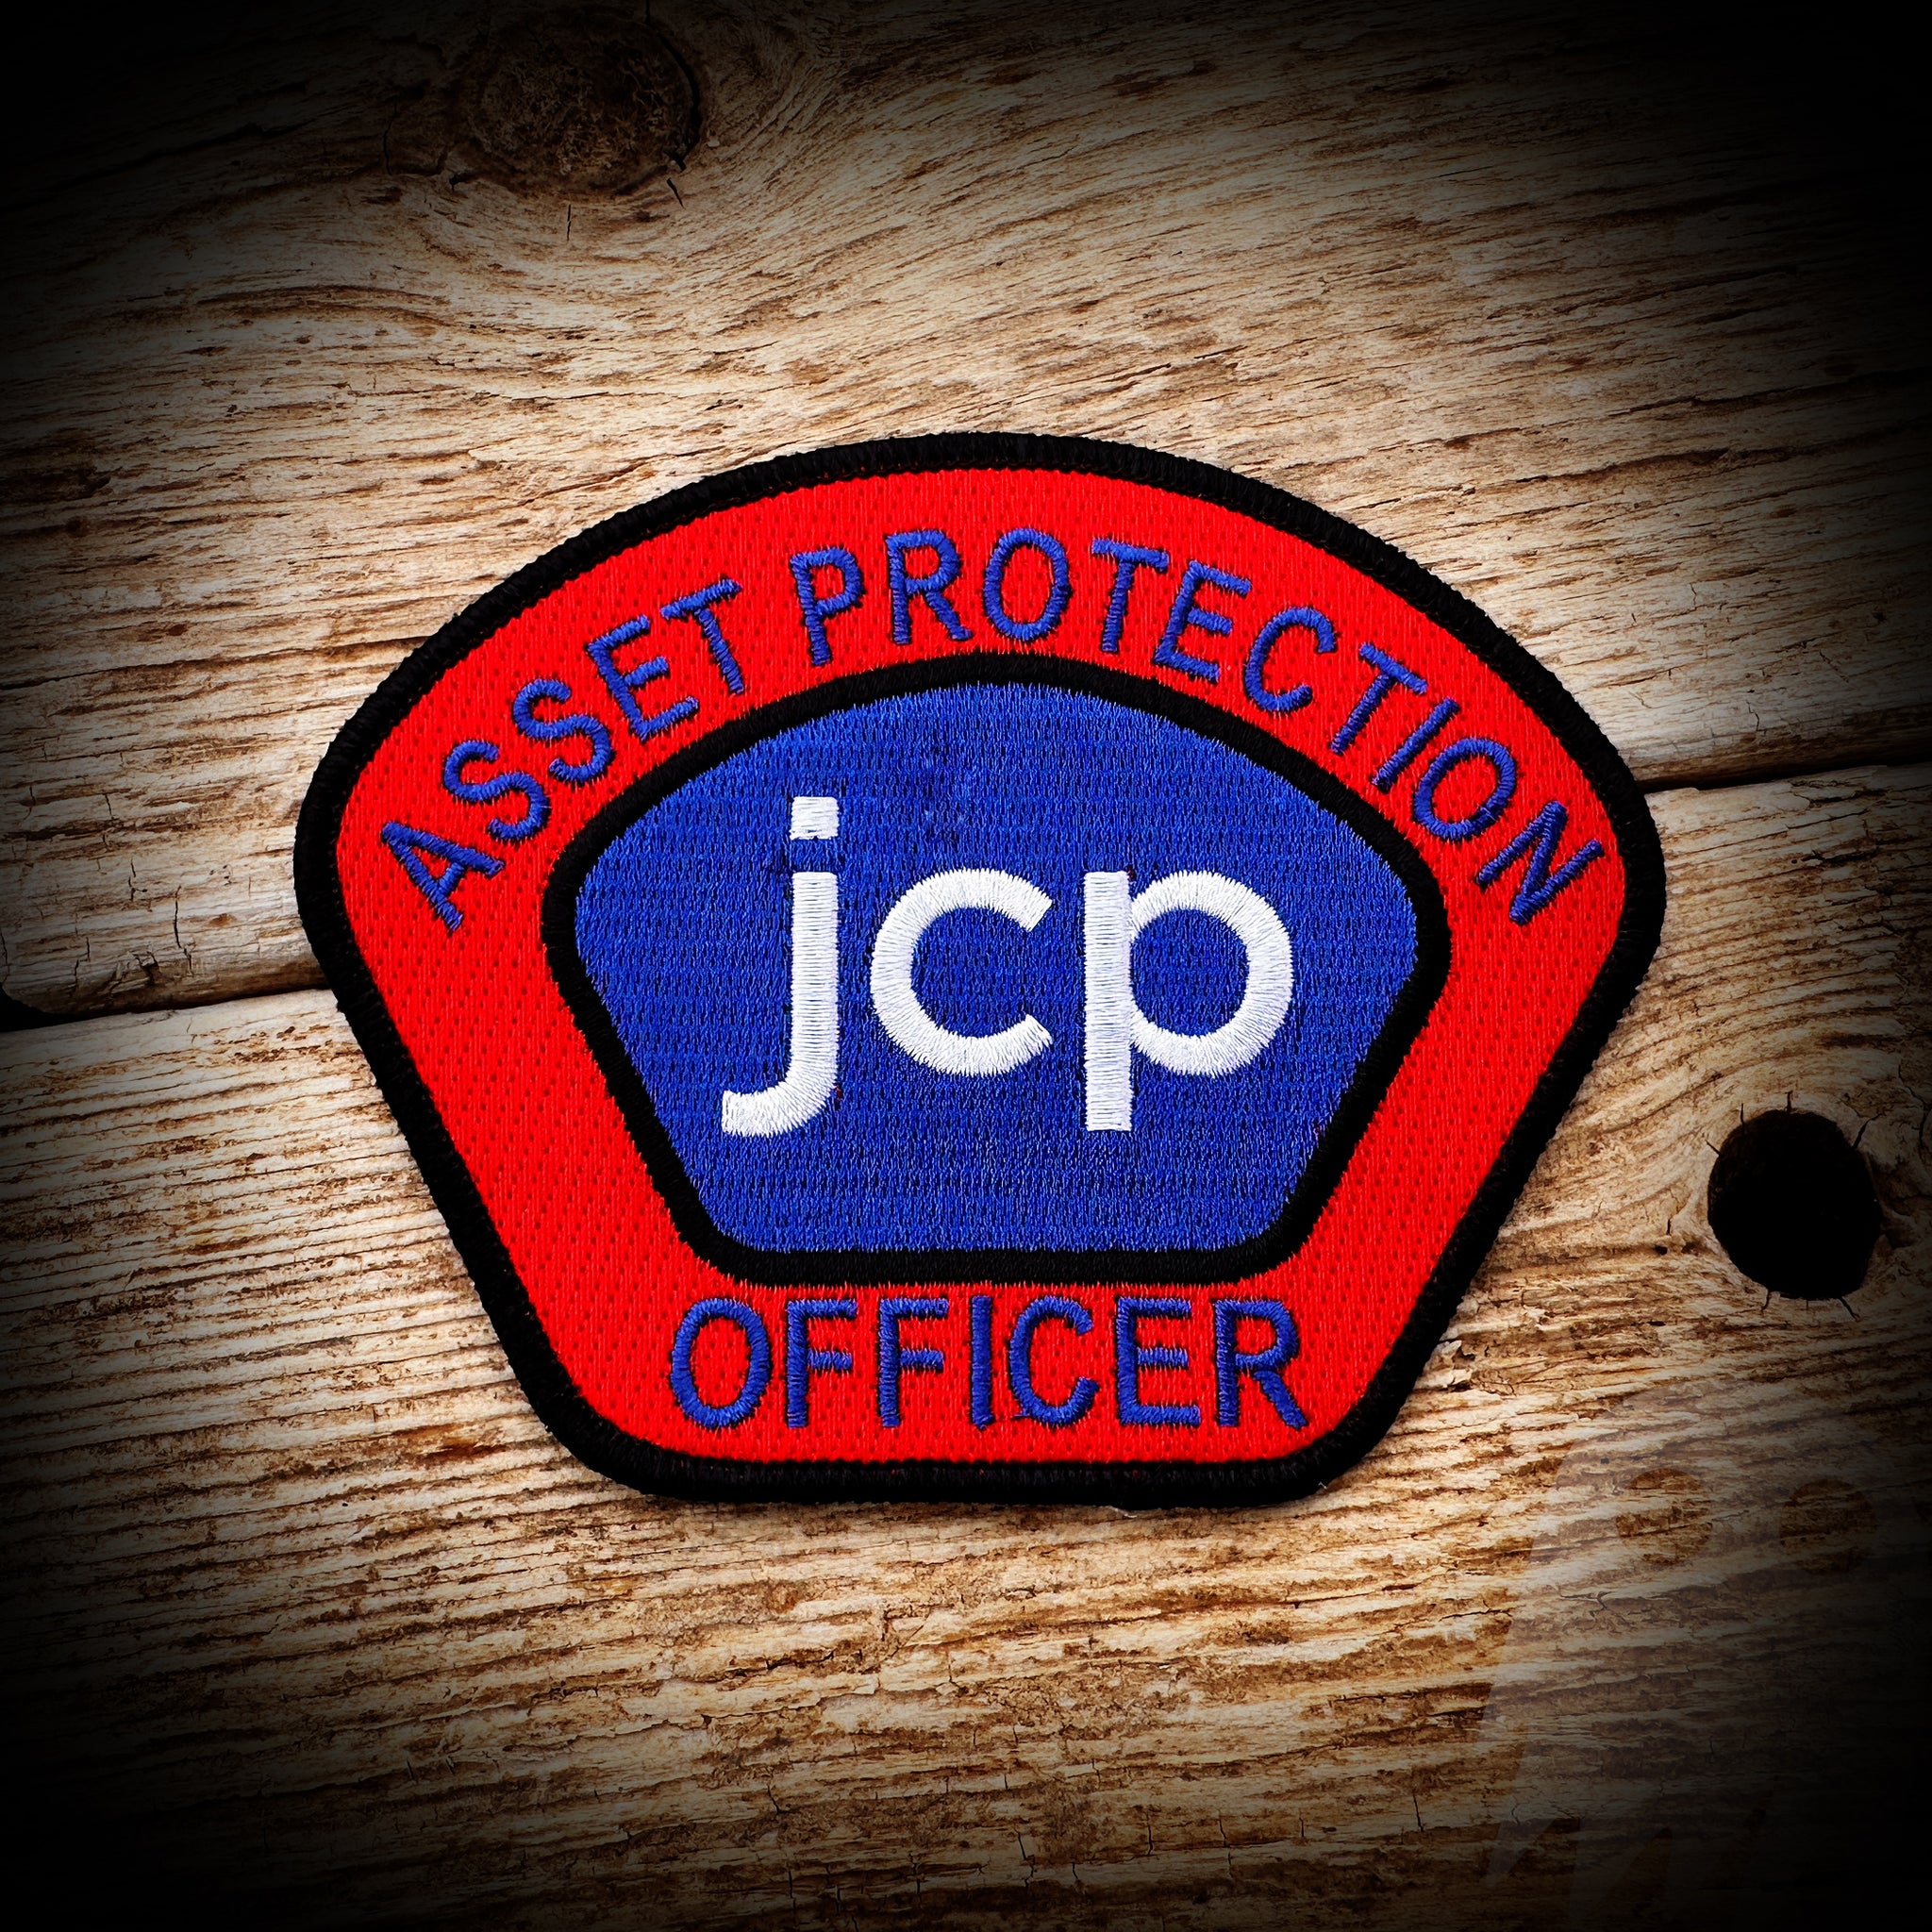 JCPenny Asset Protection Officer Patch